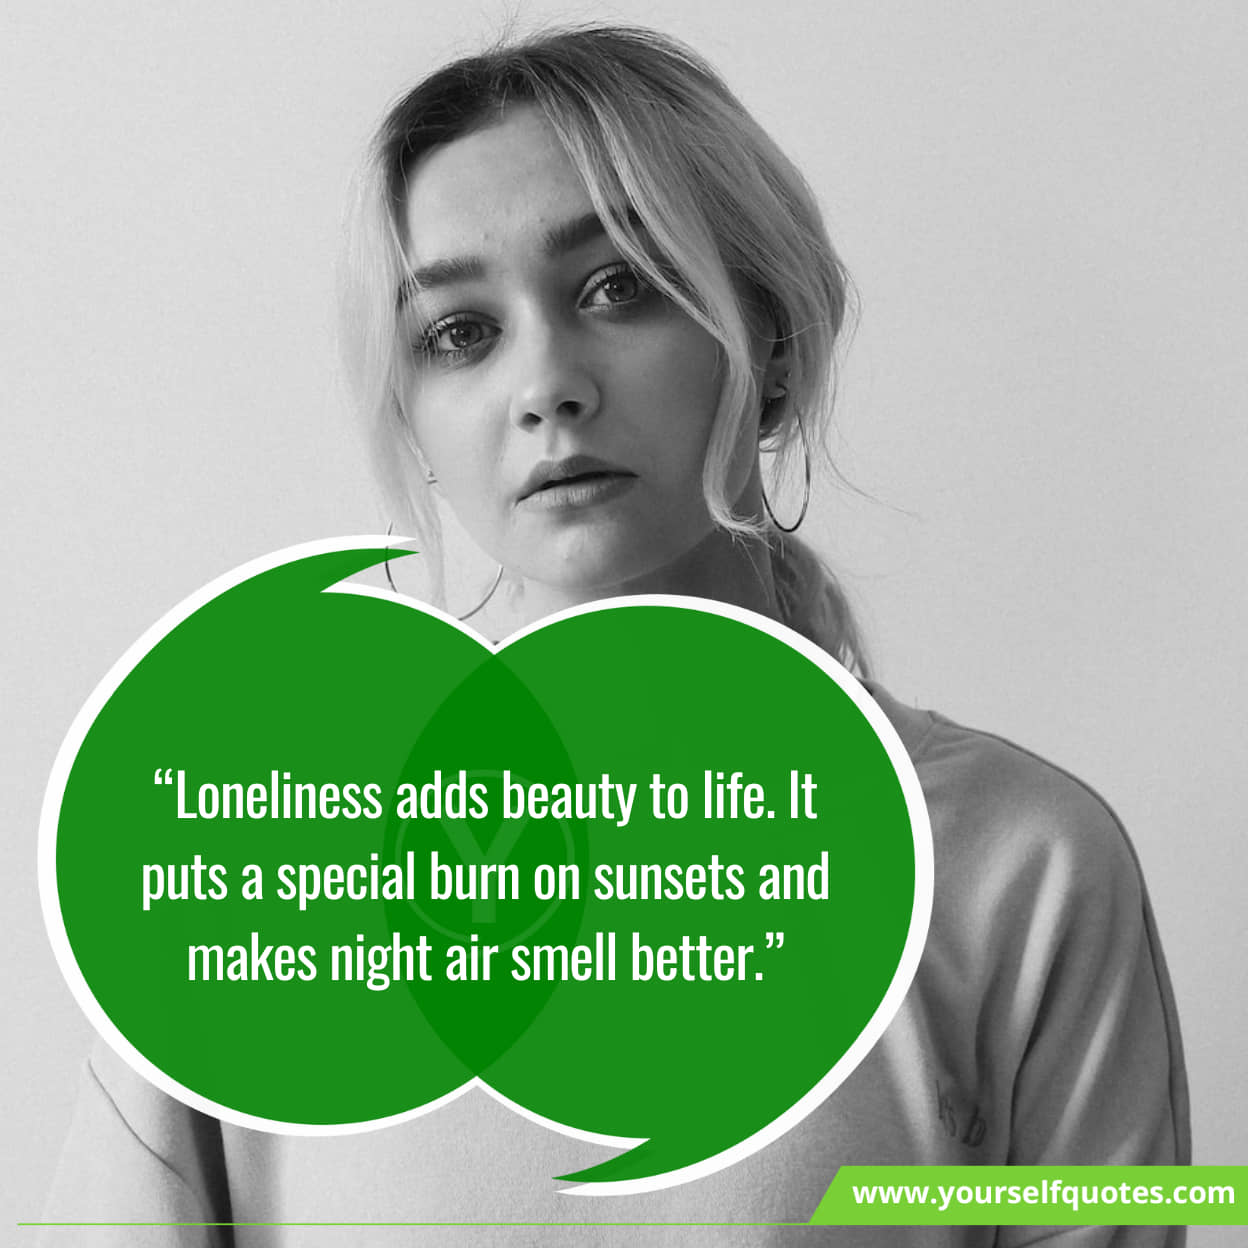 Best Loneliness Quotes About Being Lonely